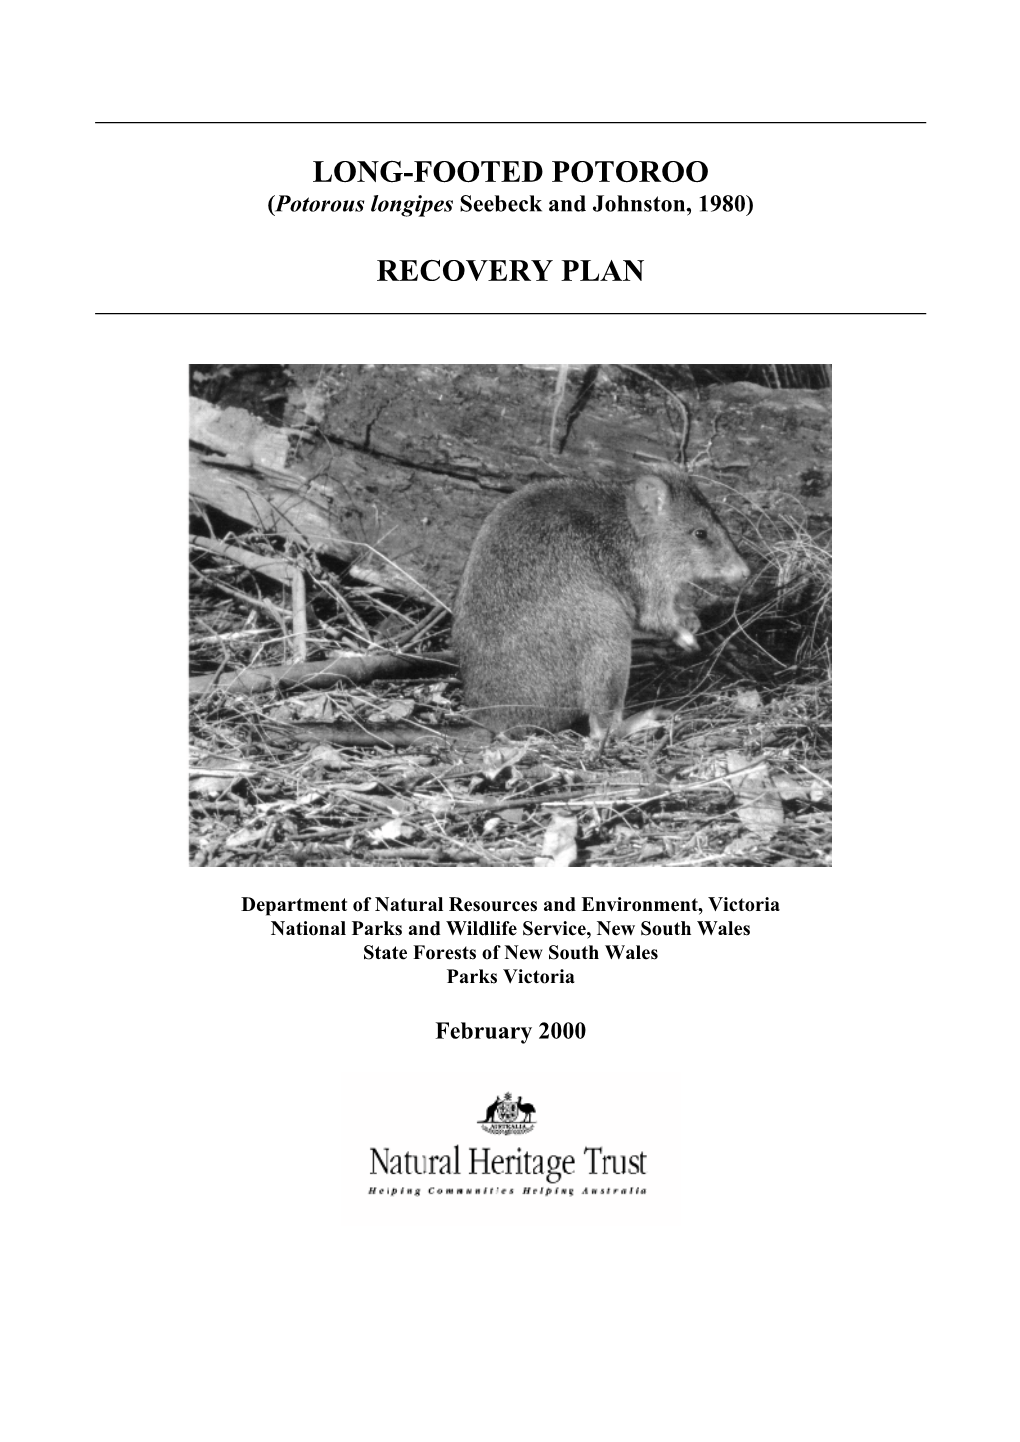 Long-Footed Potoroo (Potorous Longipes) Recovery Plan